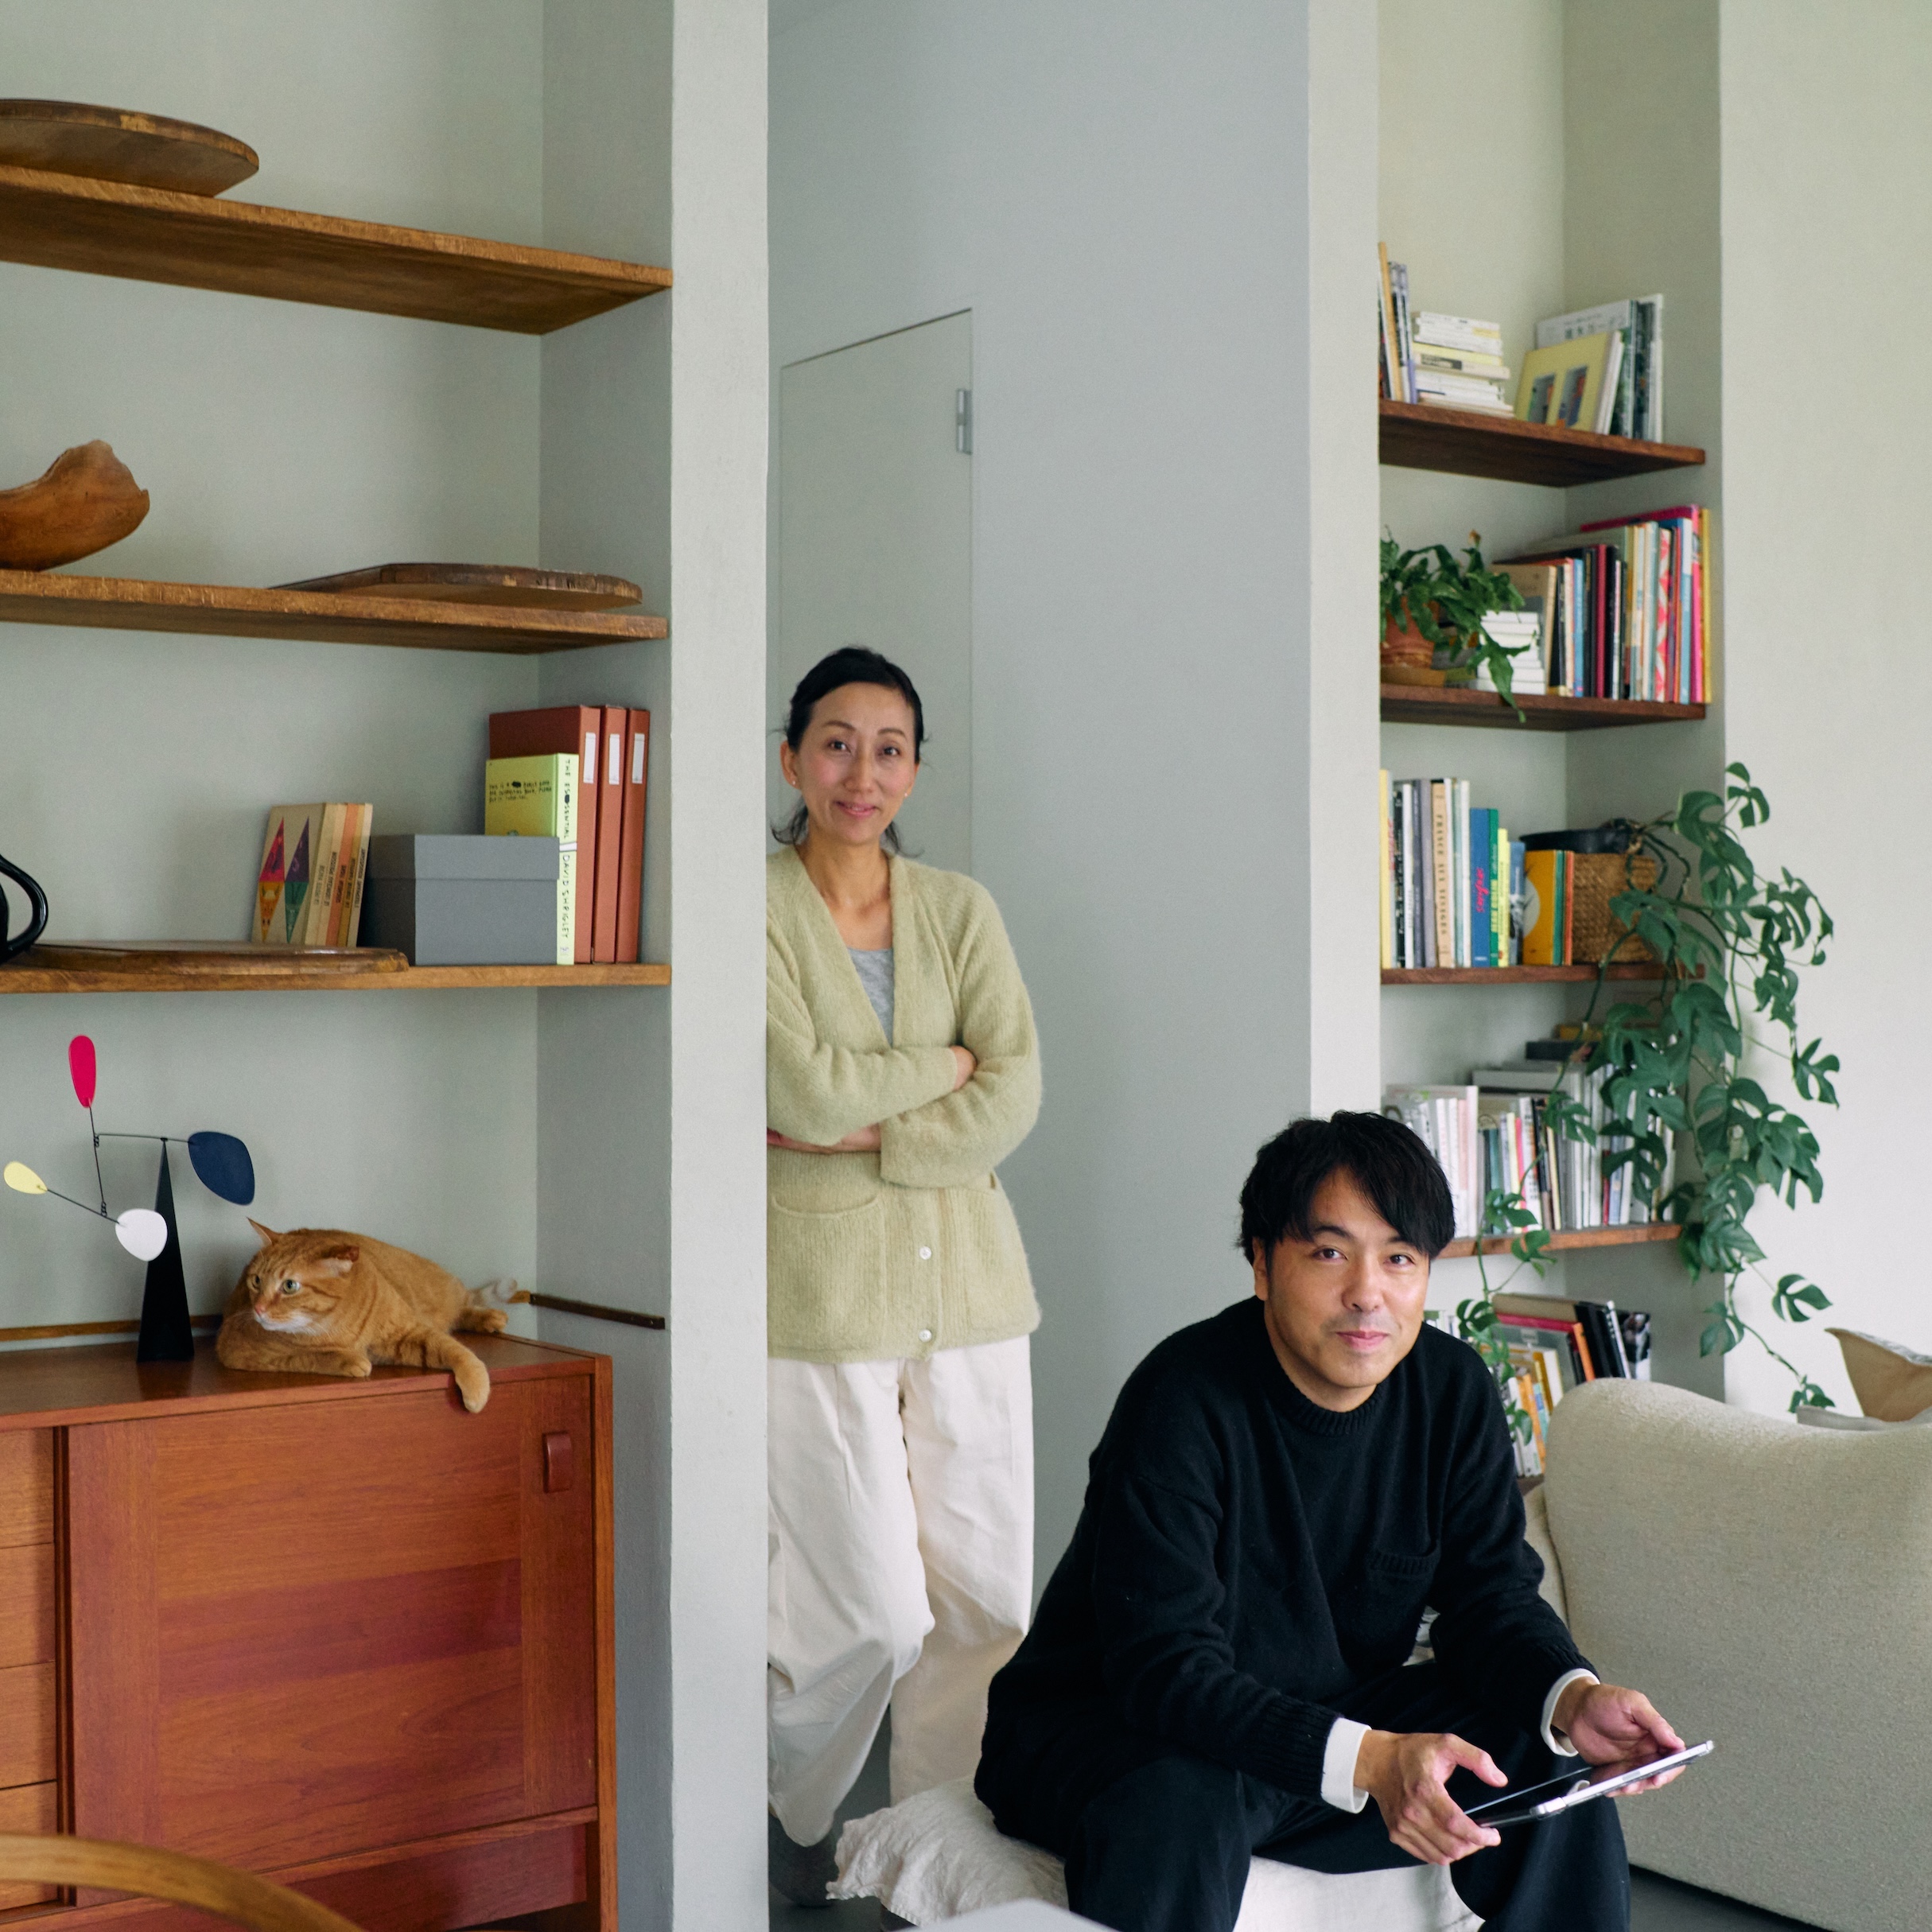 akira tani and kim hyunsook at home in the house they designed in tokyo. 197